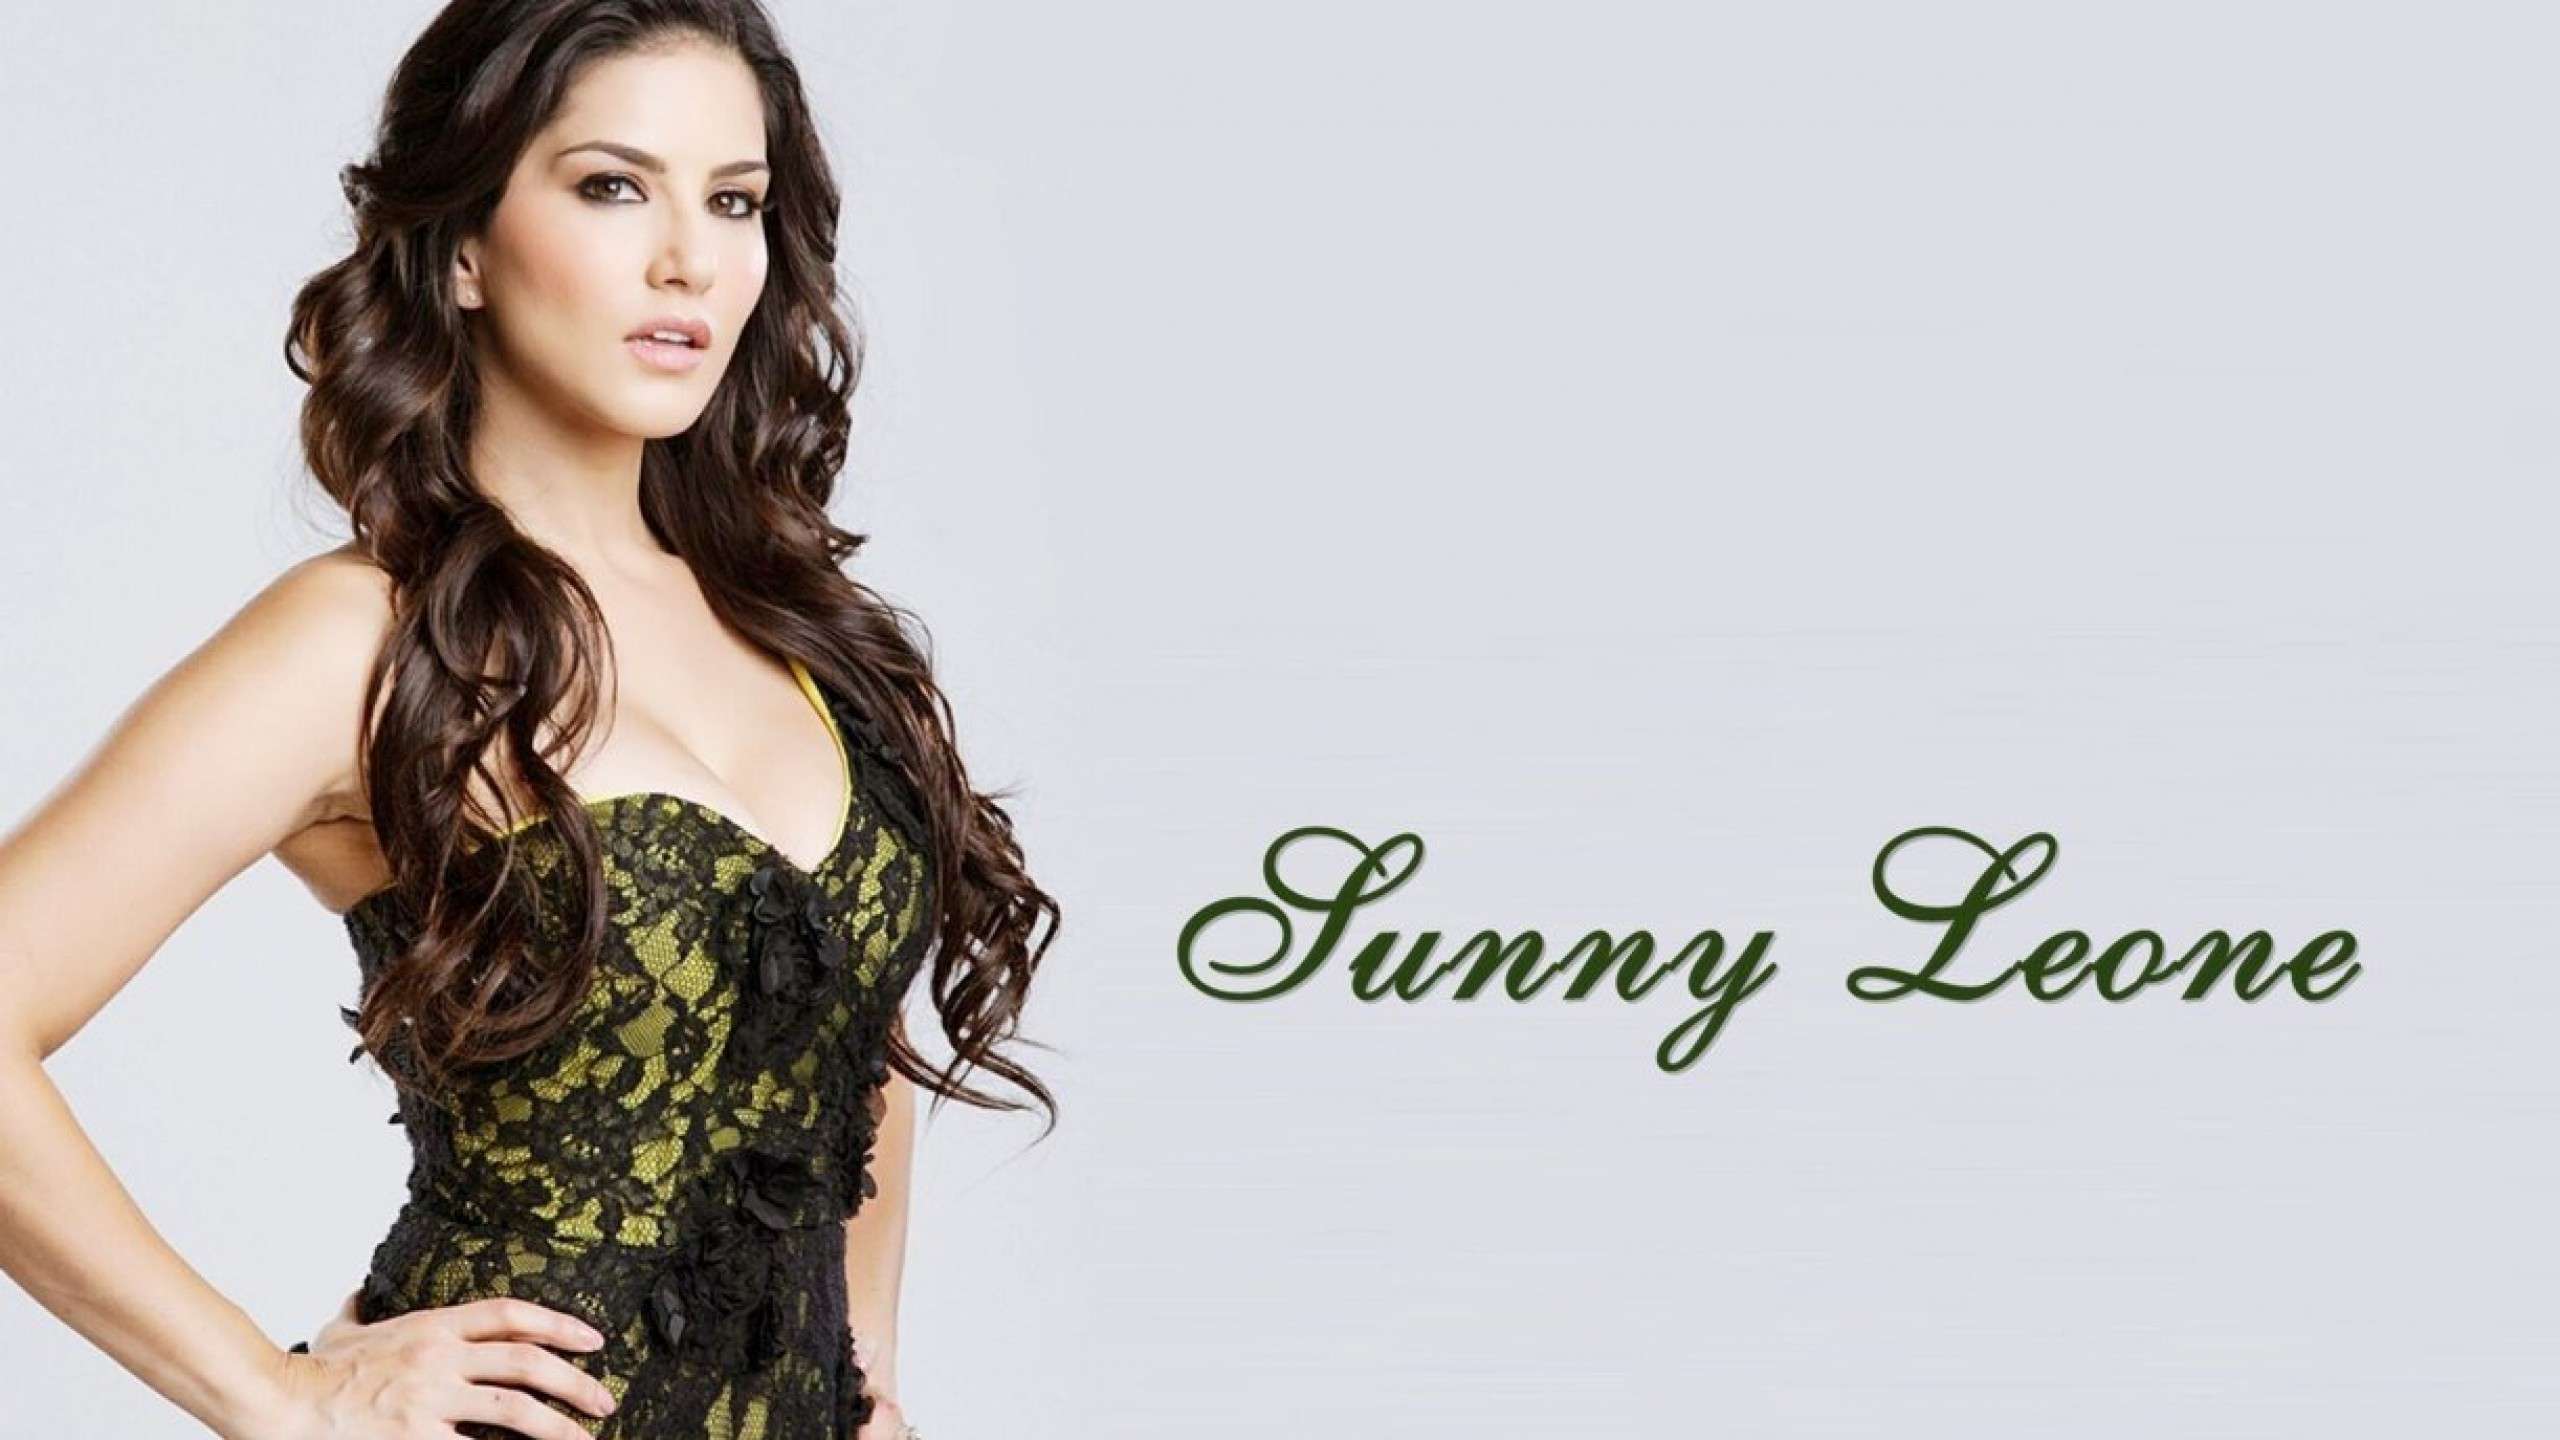 Sunny Leone HD Backgrounds